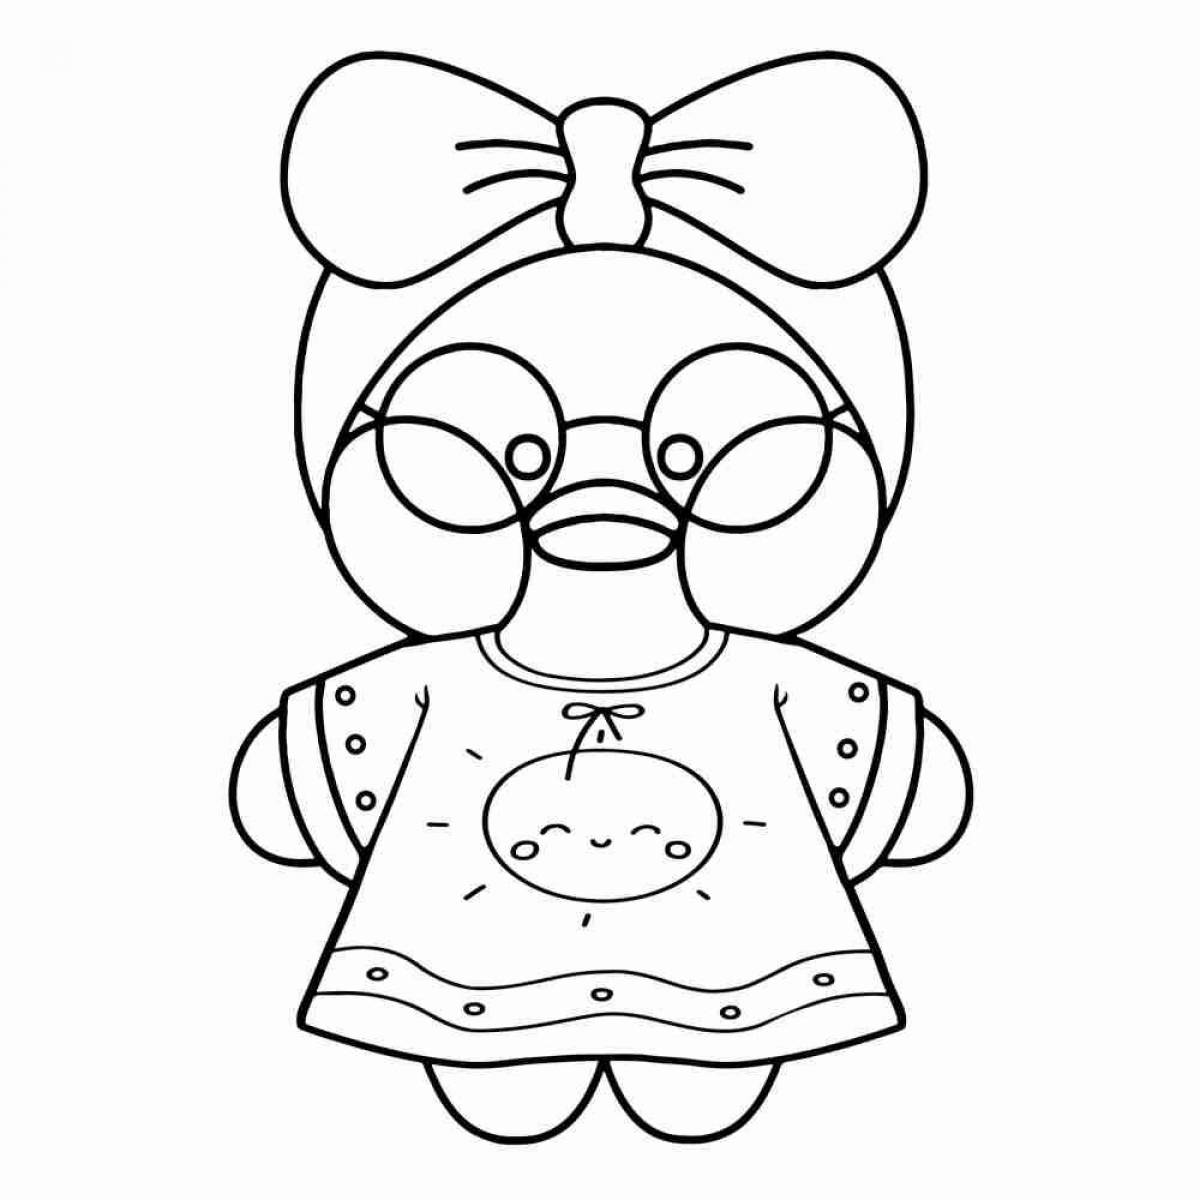 Lalafan luxury duck coloring book for little ones